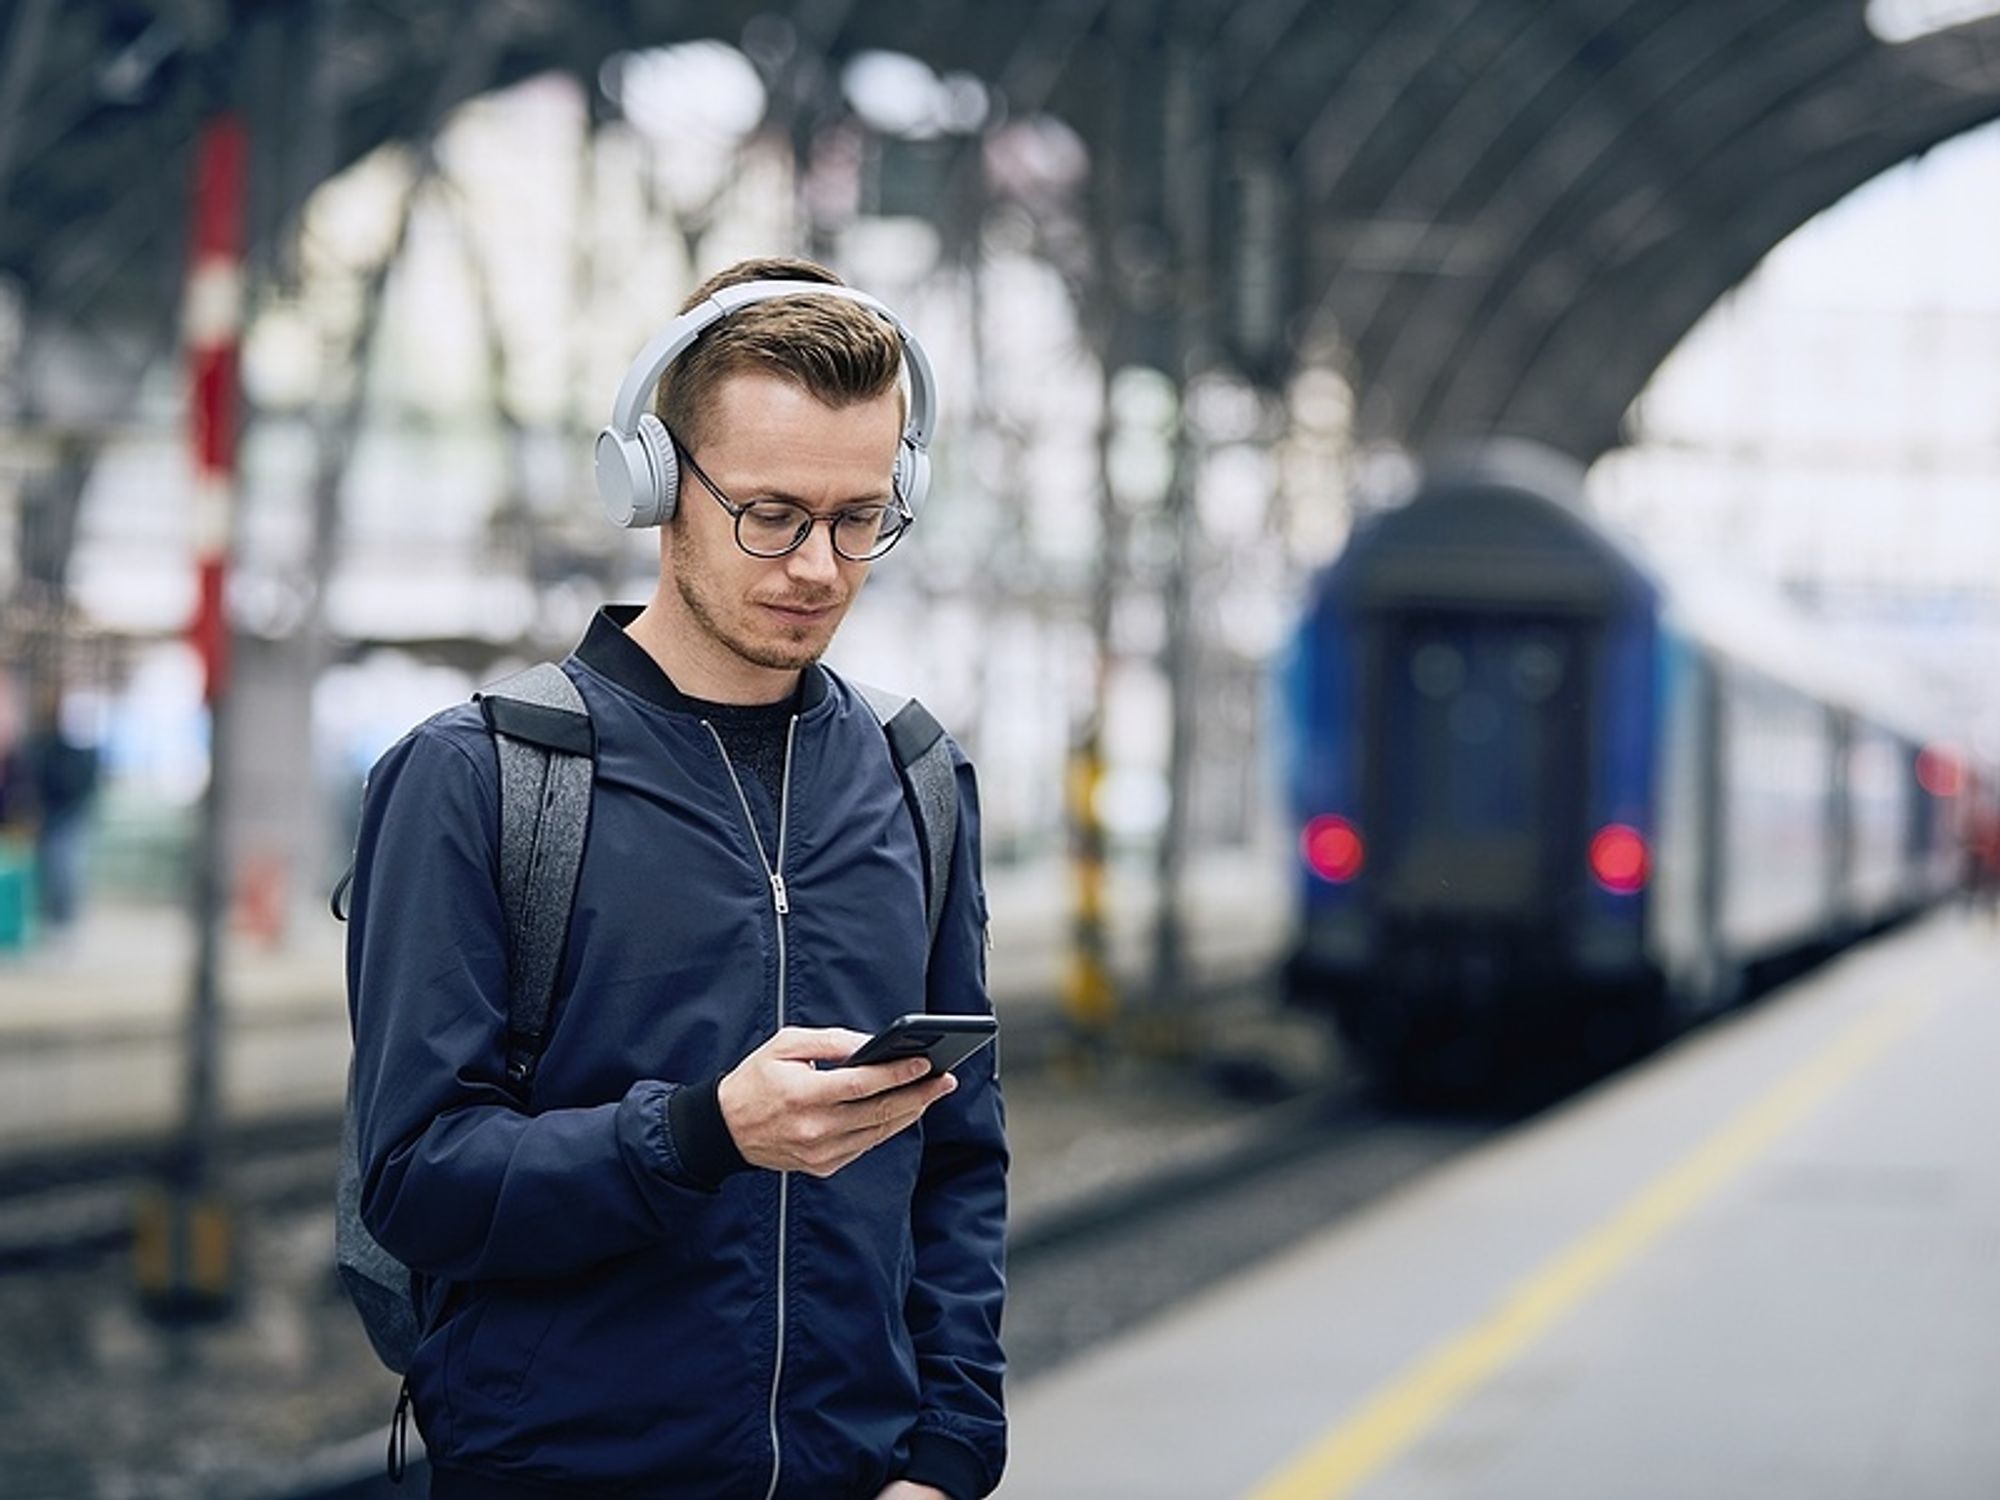 Man listens to uplifting podcast episodes while waiting for a train